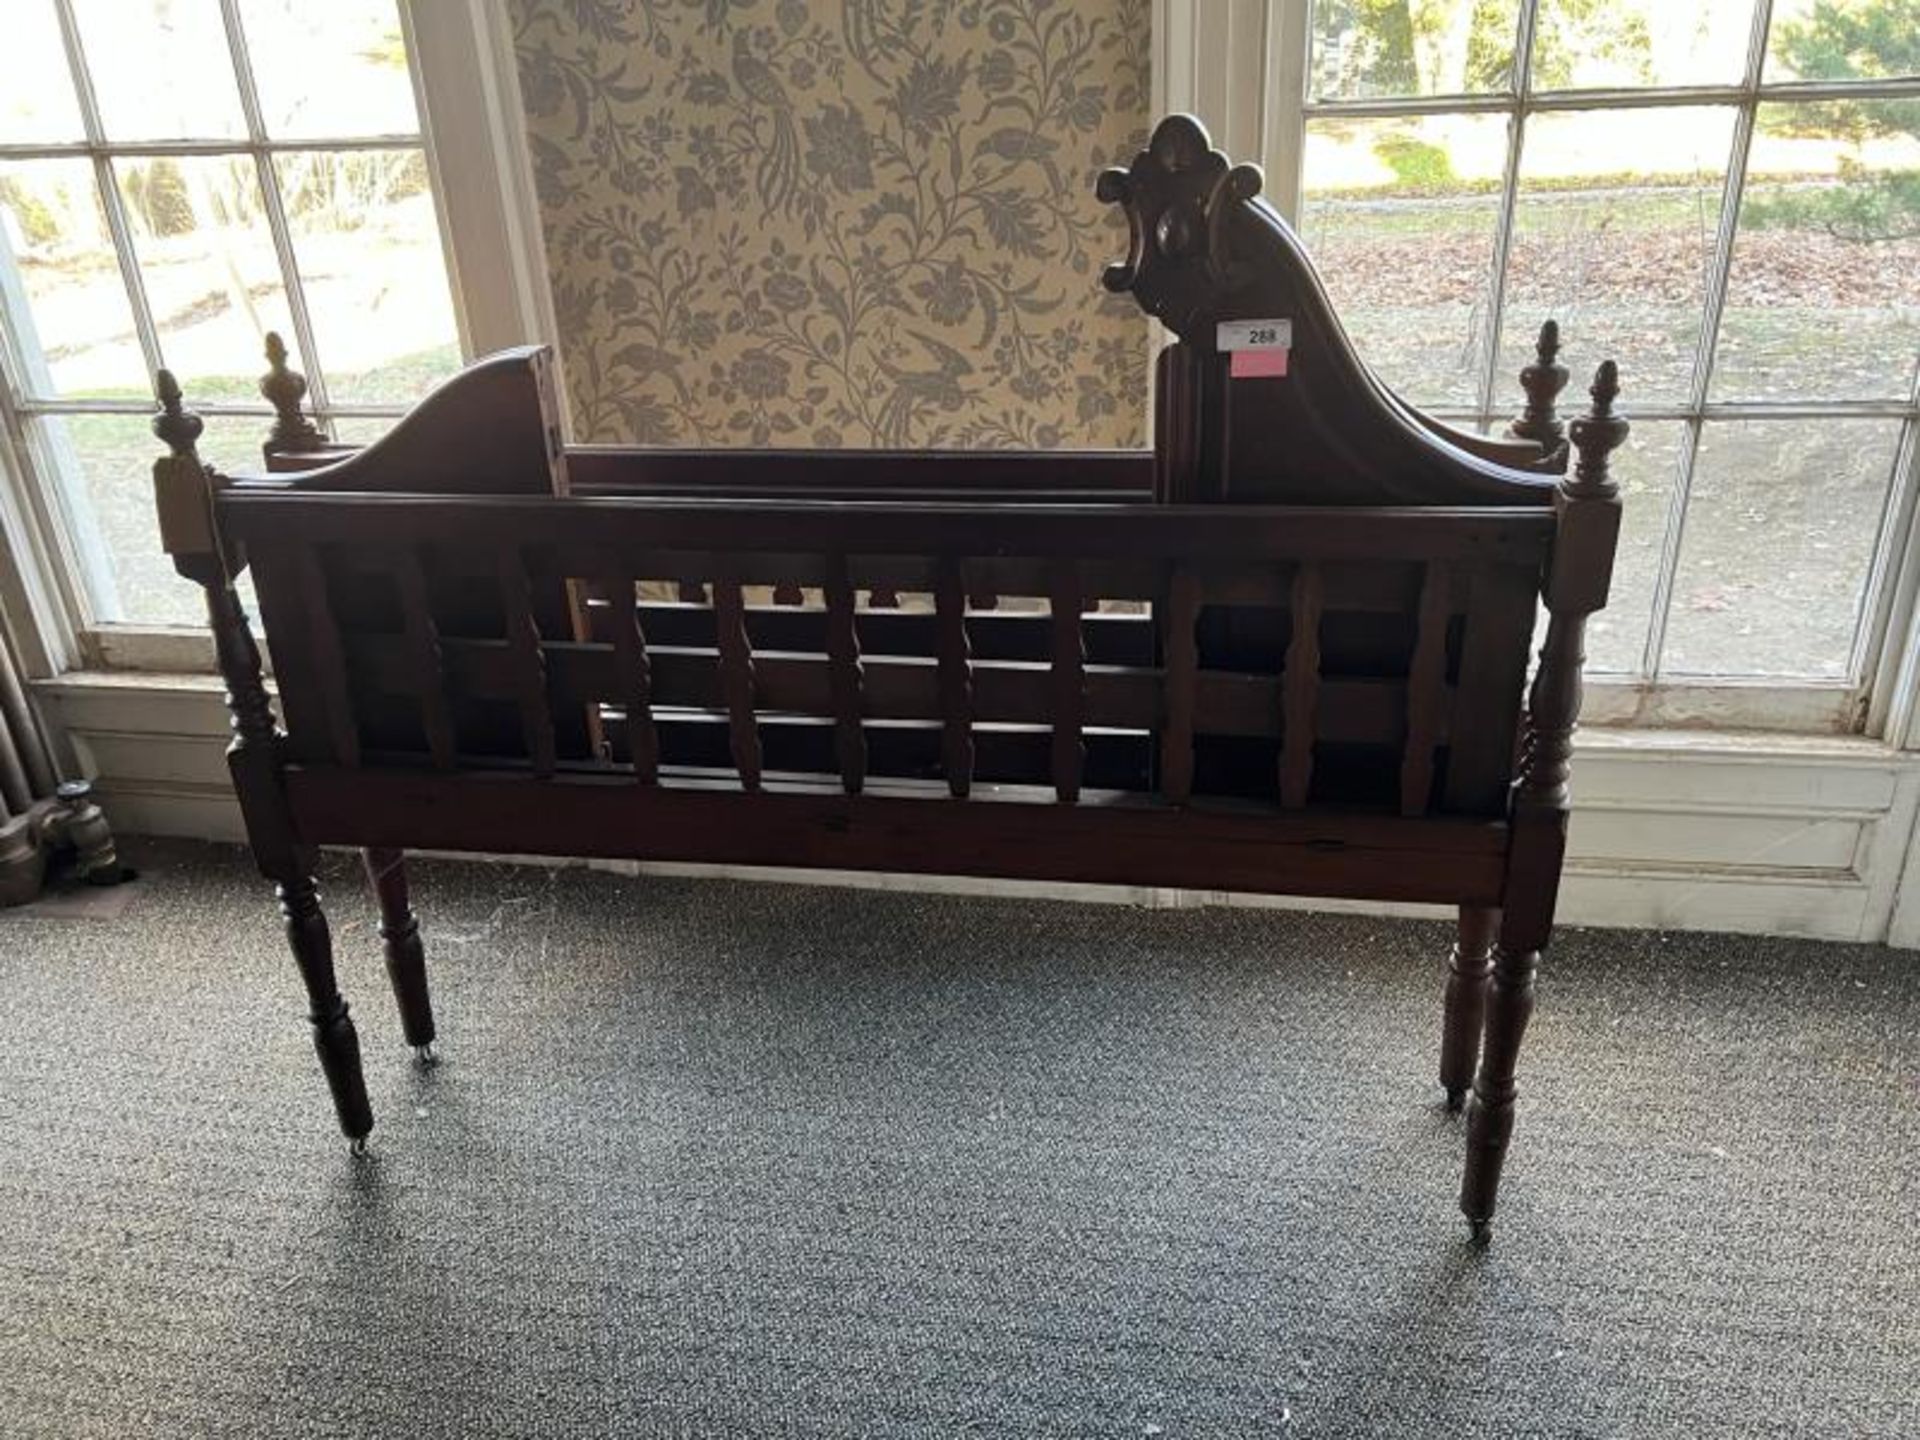 Victorian Folding Crib with Slates Seaport, in Green House - Image 28 of 30